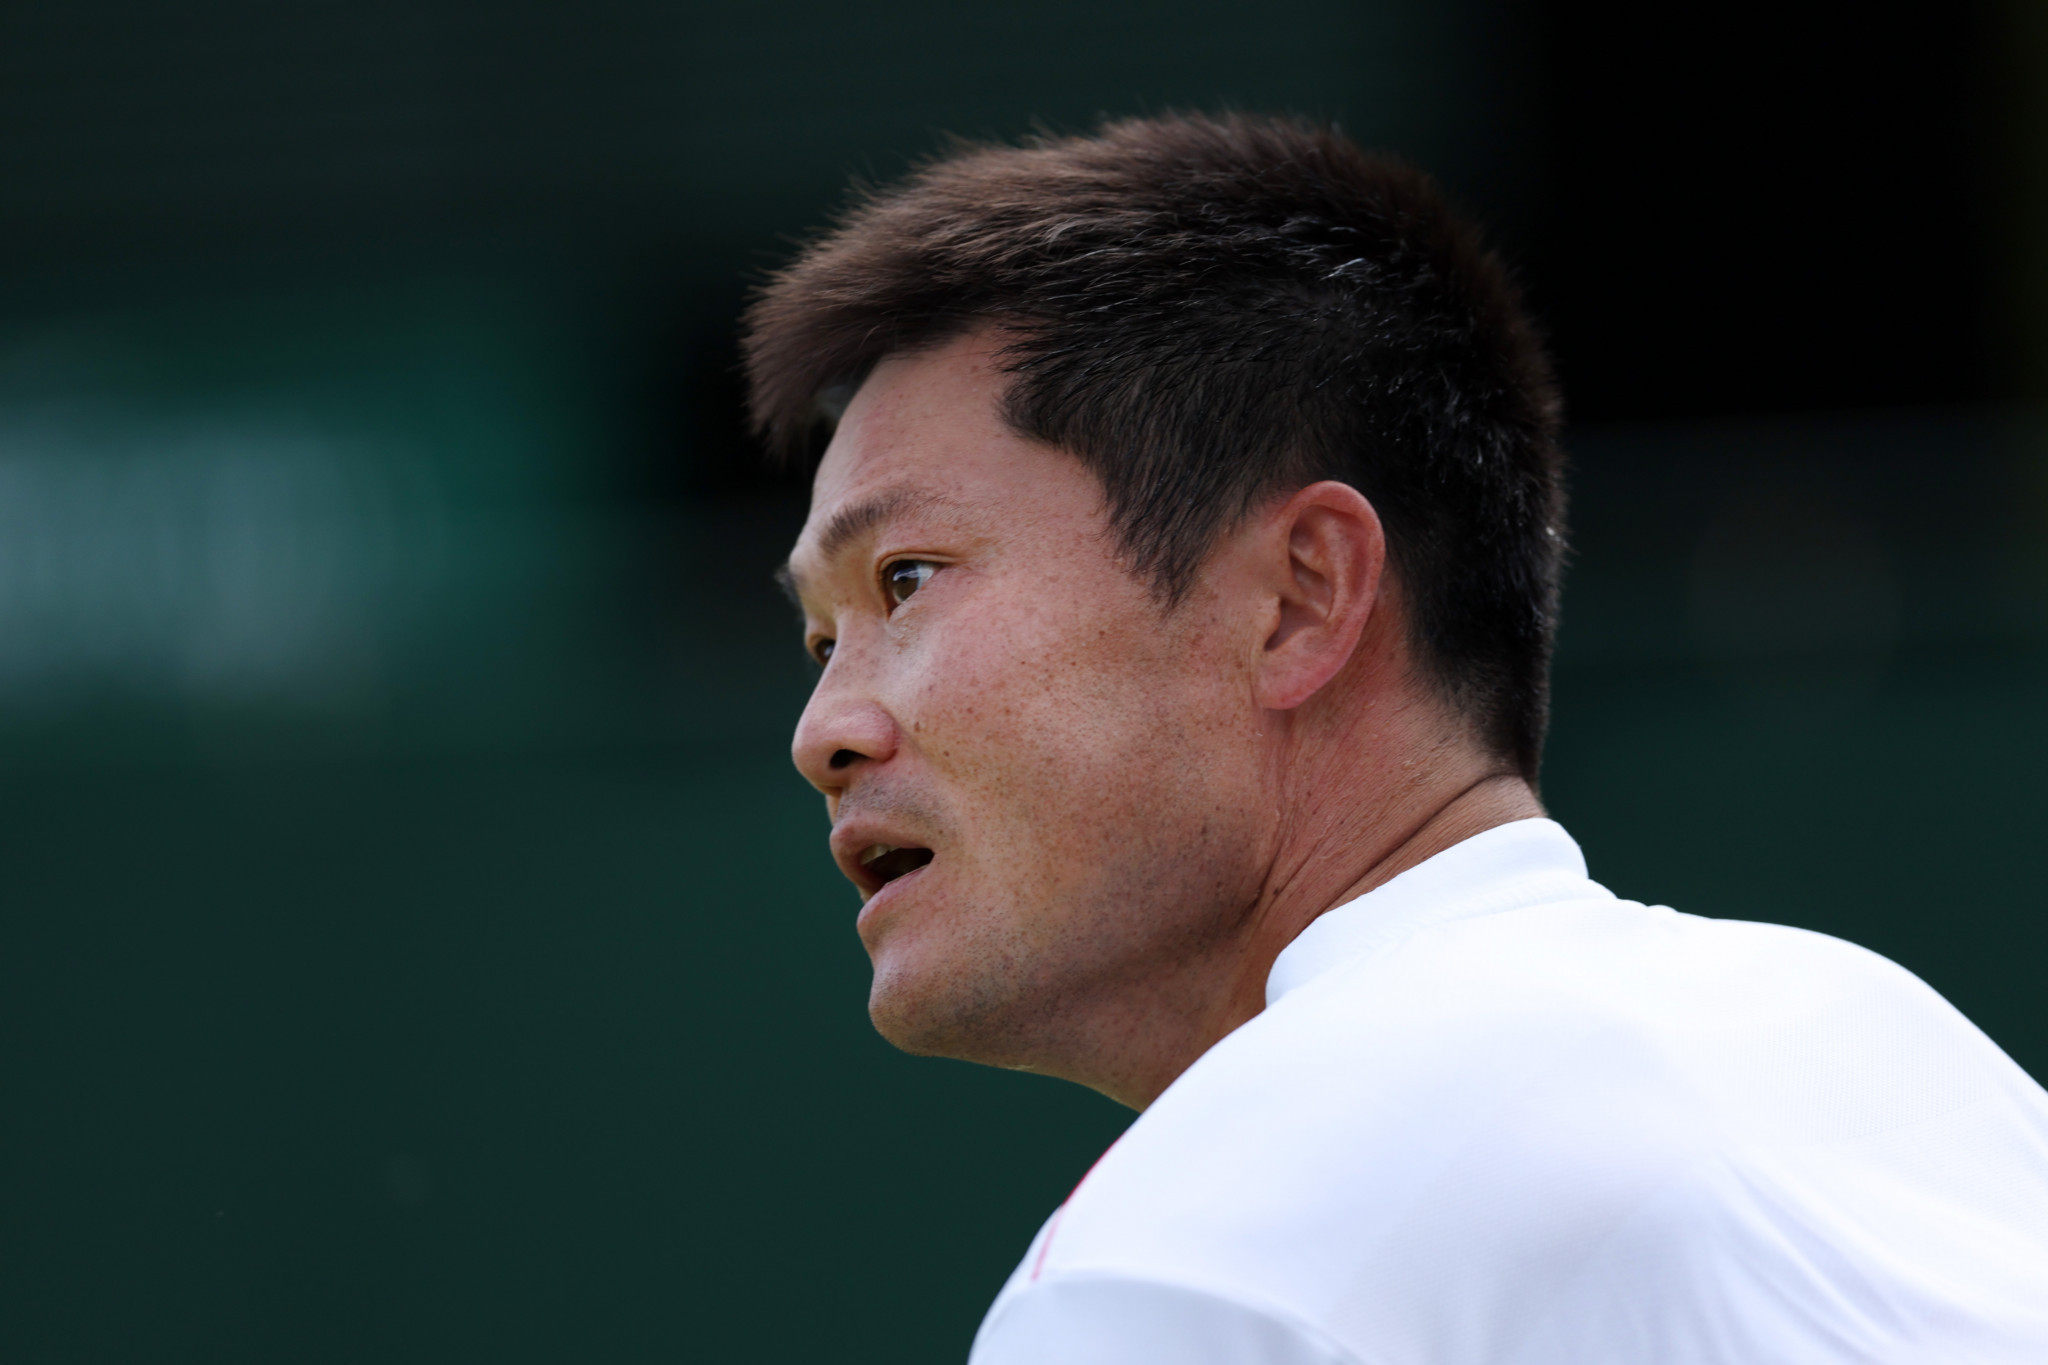 Wheelchair tennis player Shingo Kunieda, winner of 28 Grand Slams and four Paralympic Games gold medals, could become the latest recipient of Japan's People's Honour Award after announcing his retirement ©Getty Images